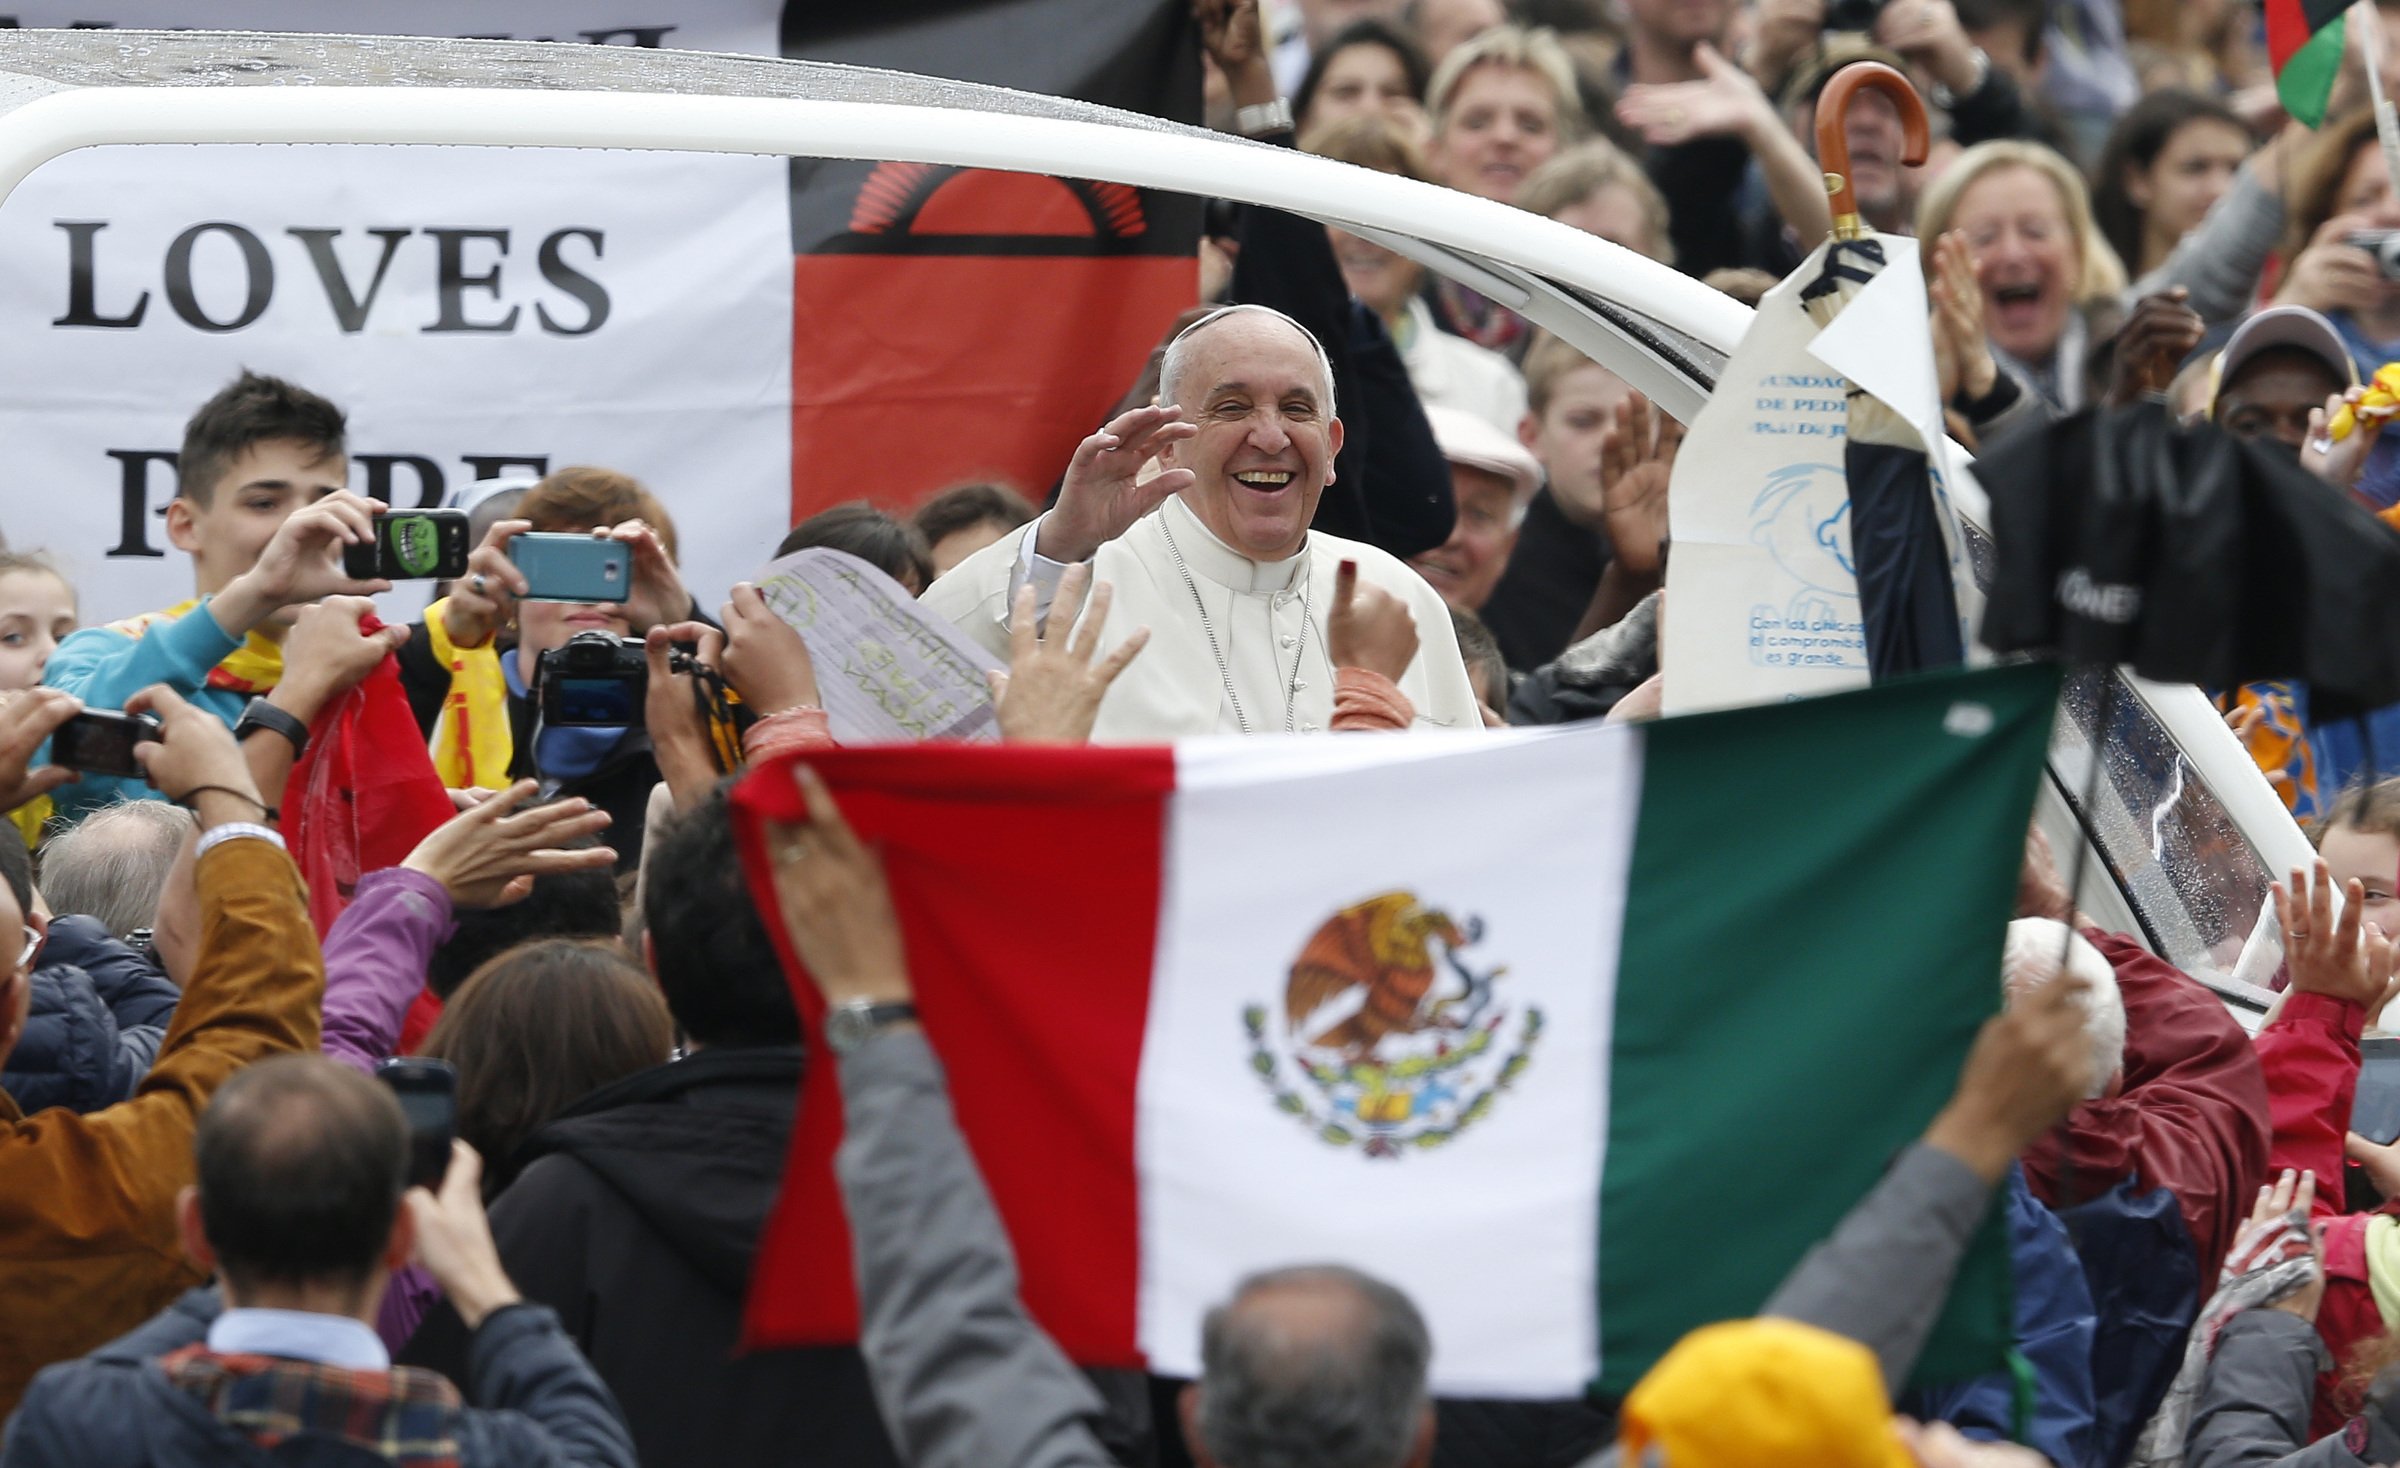 Pope Francis passes Mexico's flag as he arrives to lead general audience in St. Peter's Square at Vatican